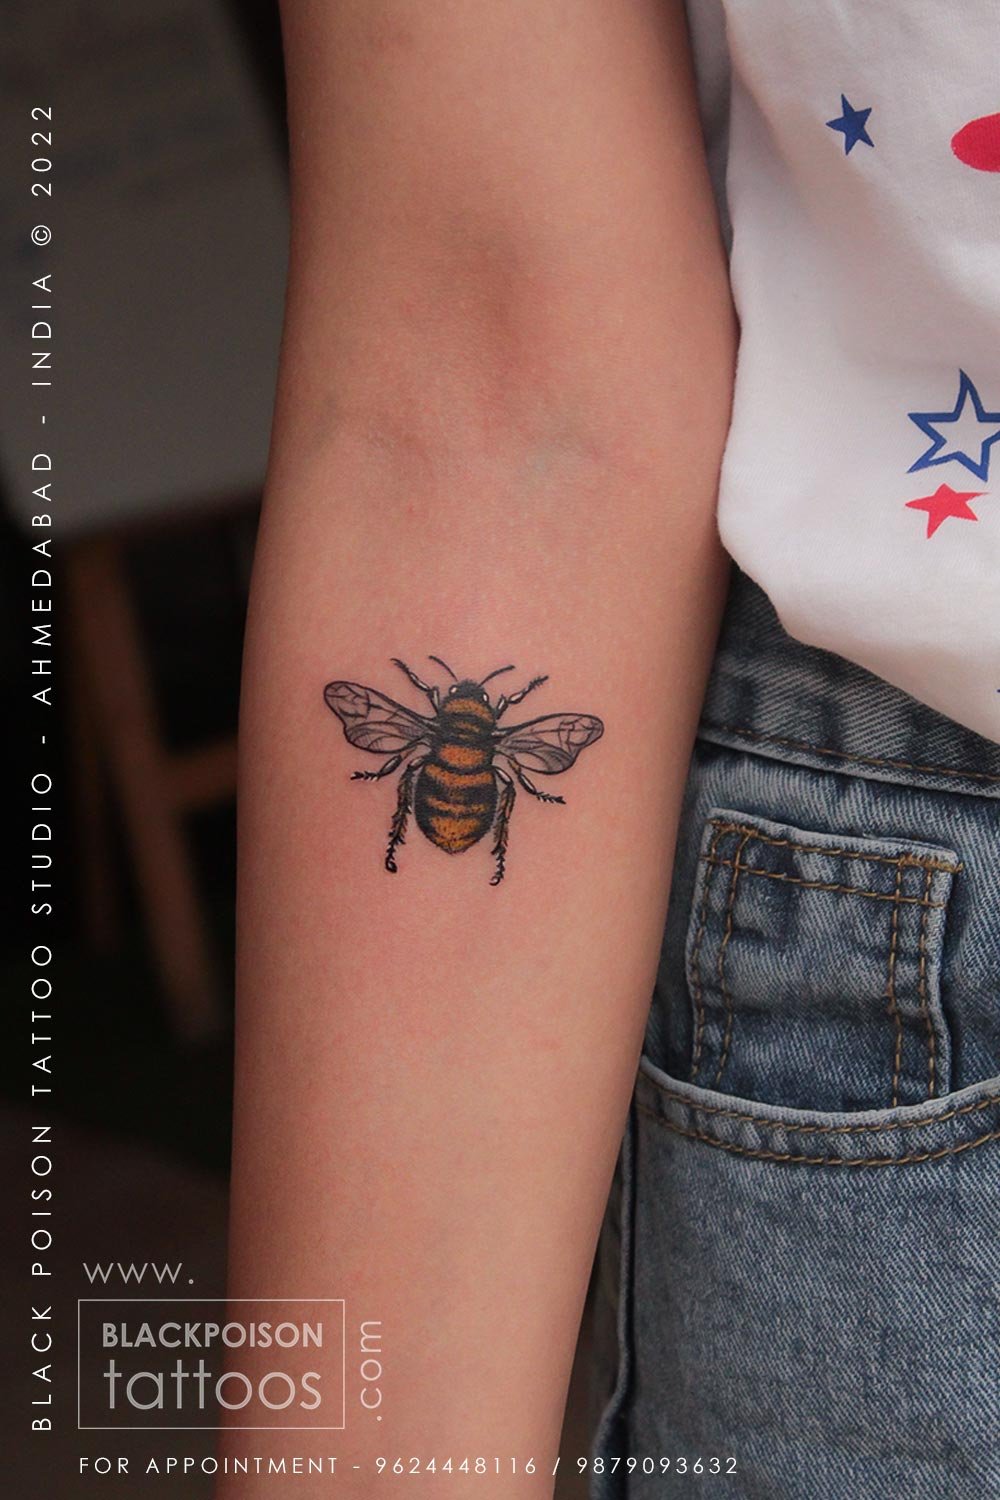 A cute bumblebee for Joana, thank you! I'm in love with this placement 😍 # bumblebee #bumblebeetattoo #cutetattoos | Instagram